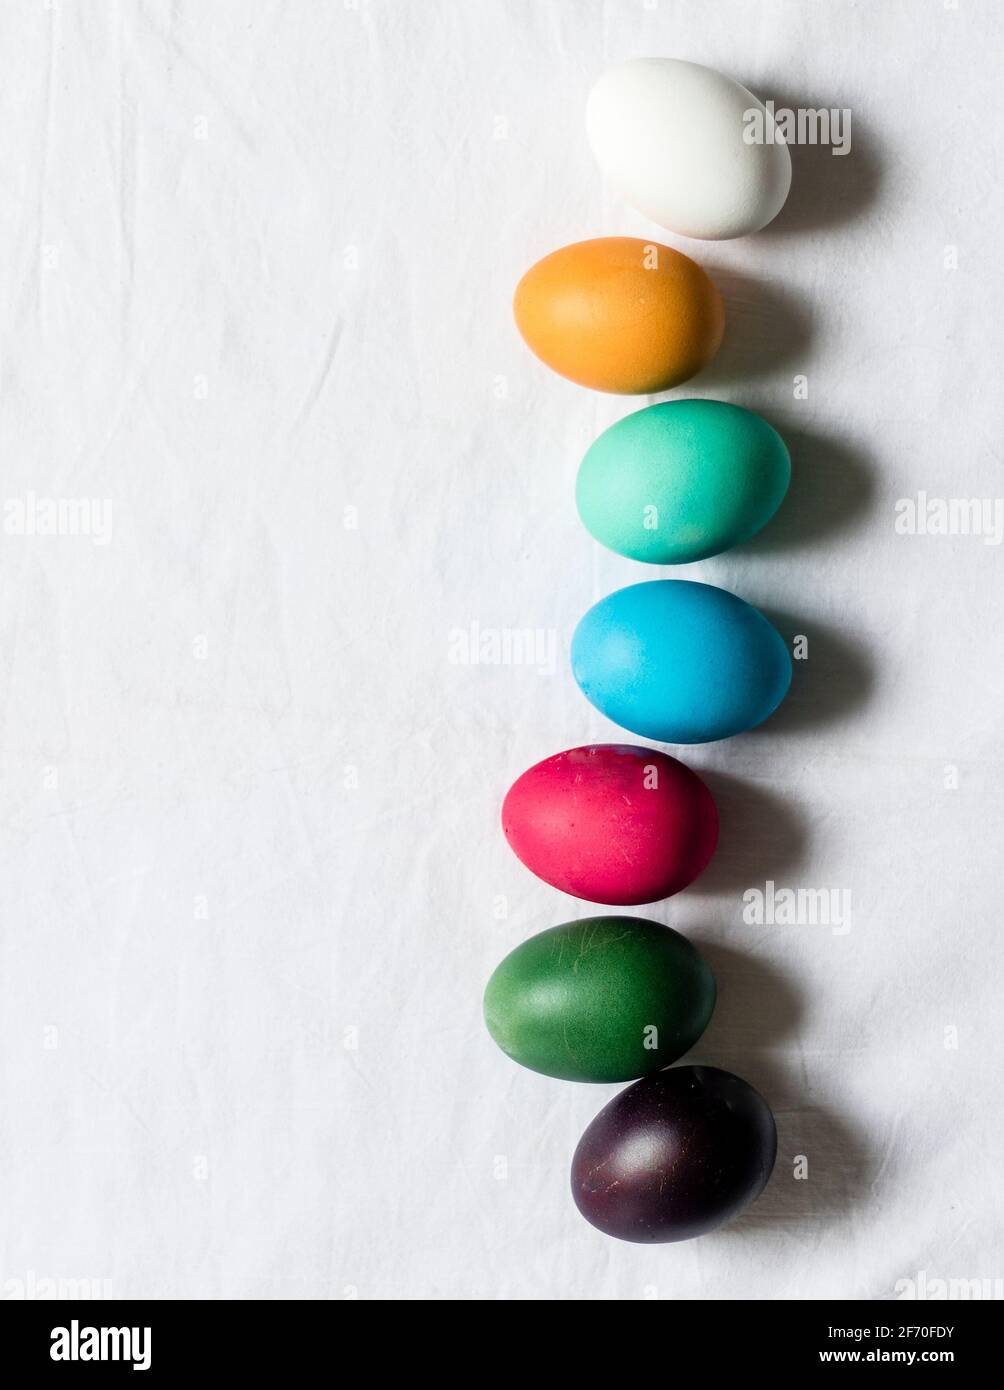 Easter, minimalistic scene - dyed eggs lying on a table, ready to be place in Easter basket. Stock Photo